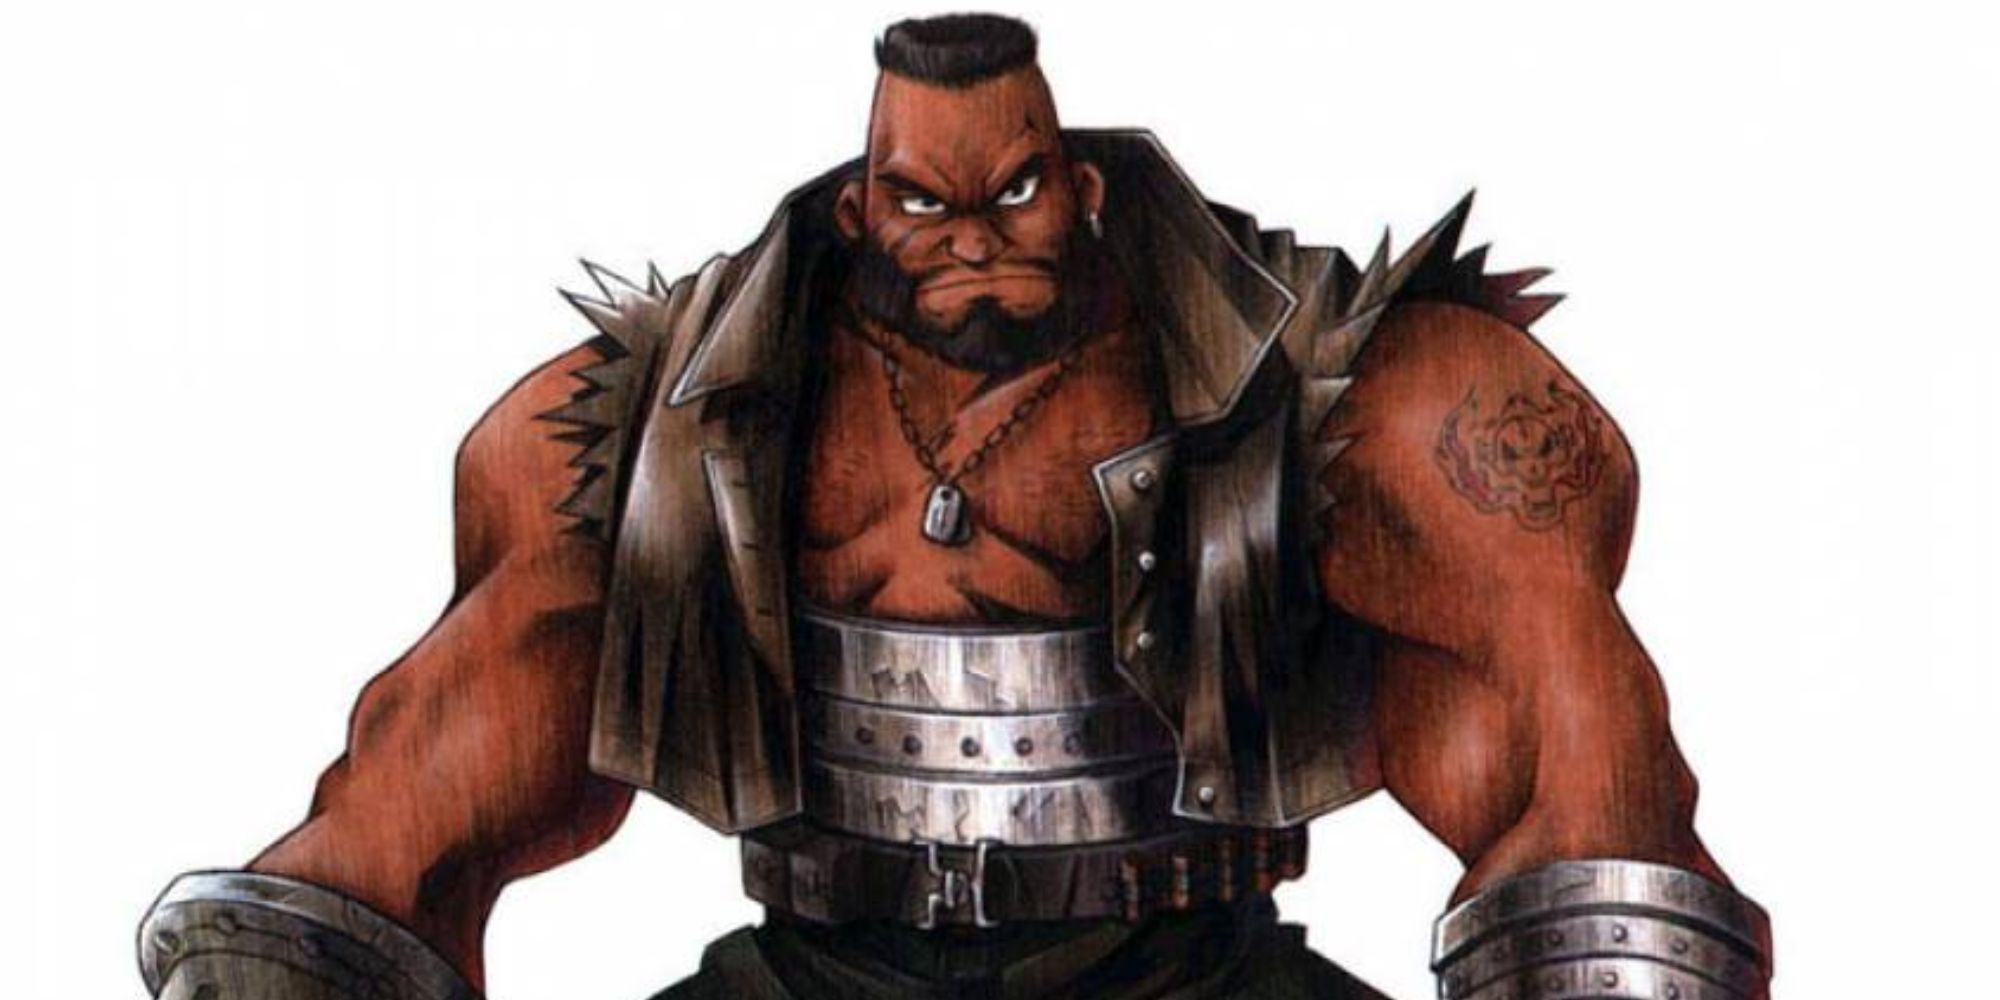 Barret Character Art From Final Fantasy VII